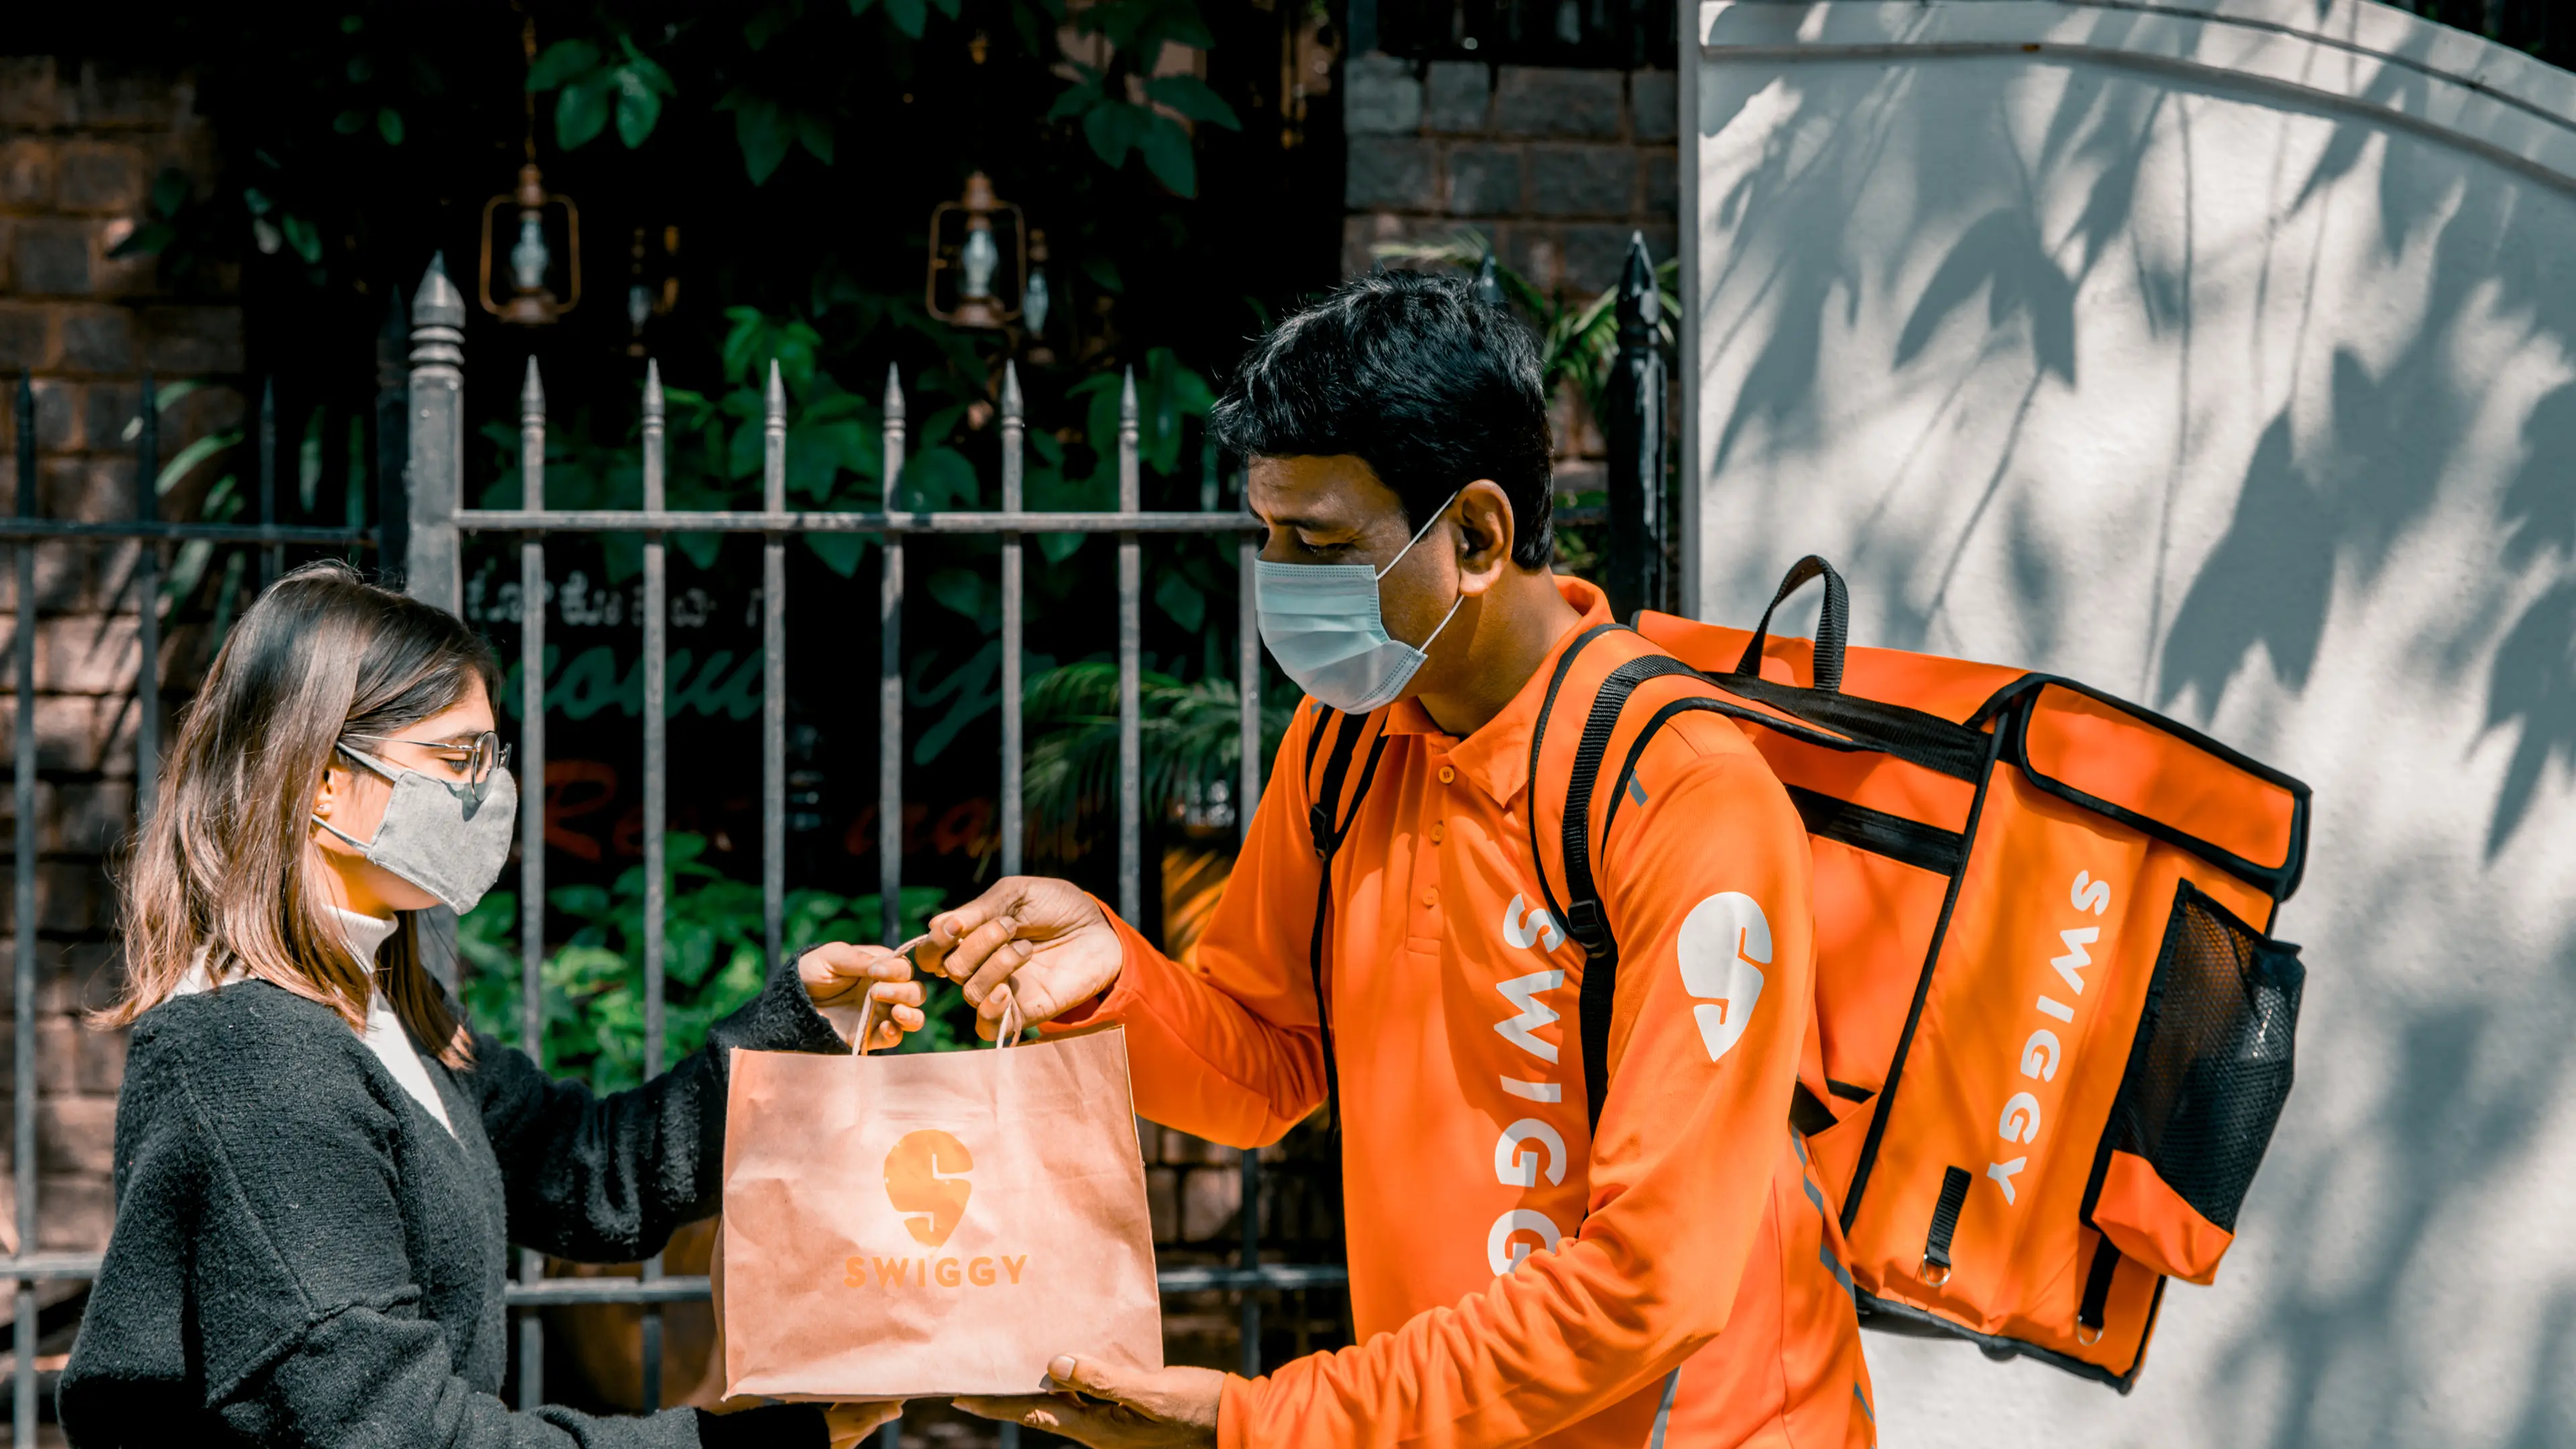 Swiggy adds collaborative food recommendation feature Eatlists